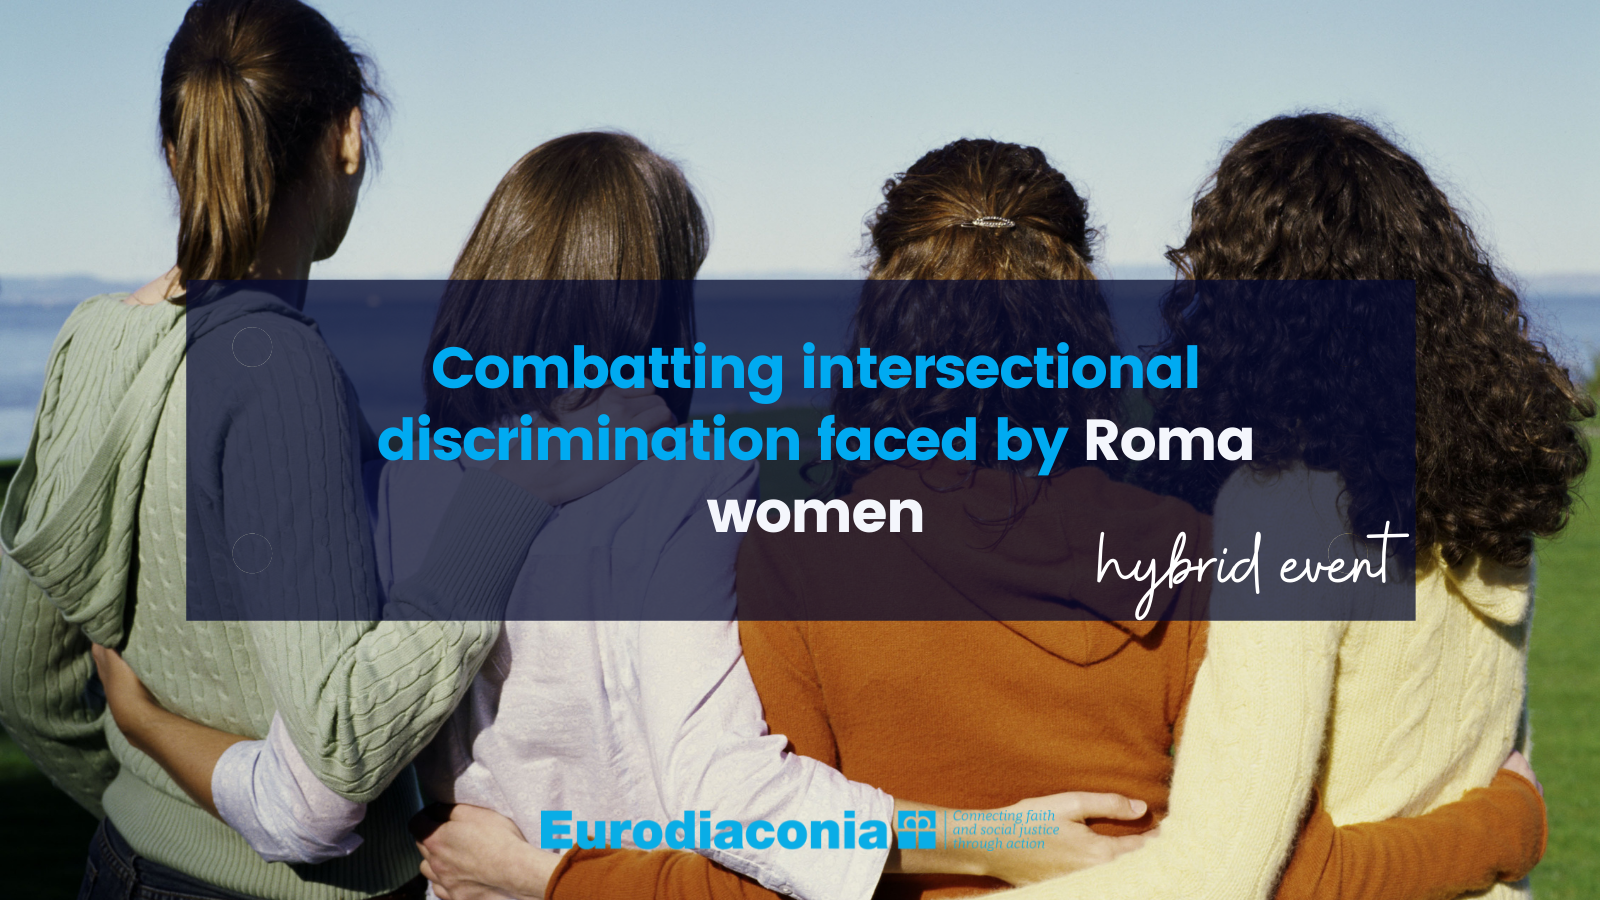 Combatting intersectional discrimination faced by Roma women